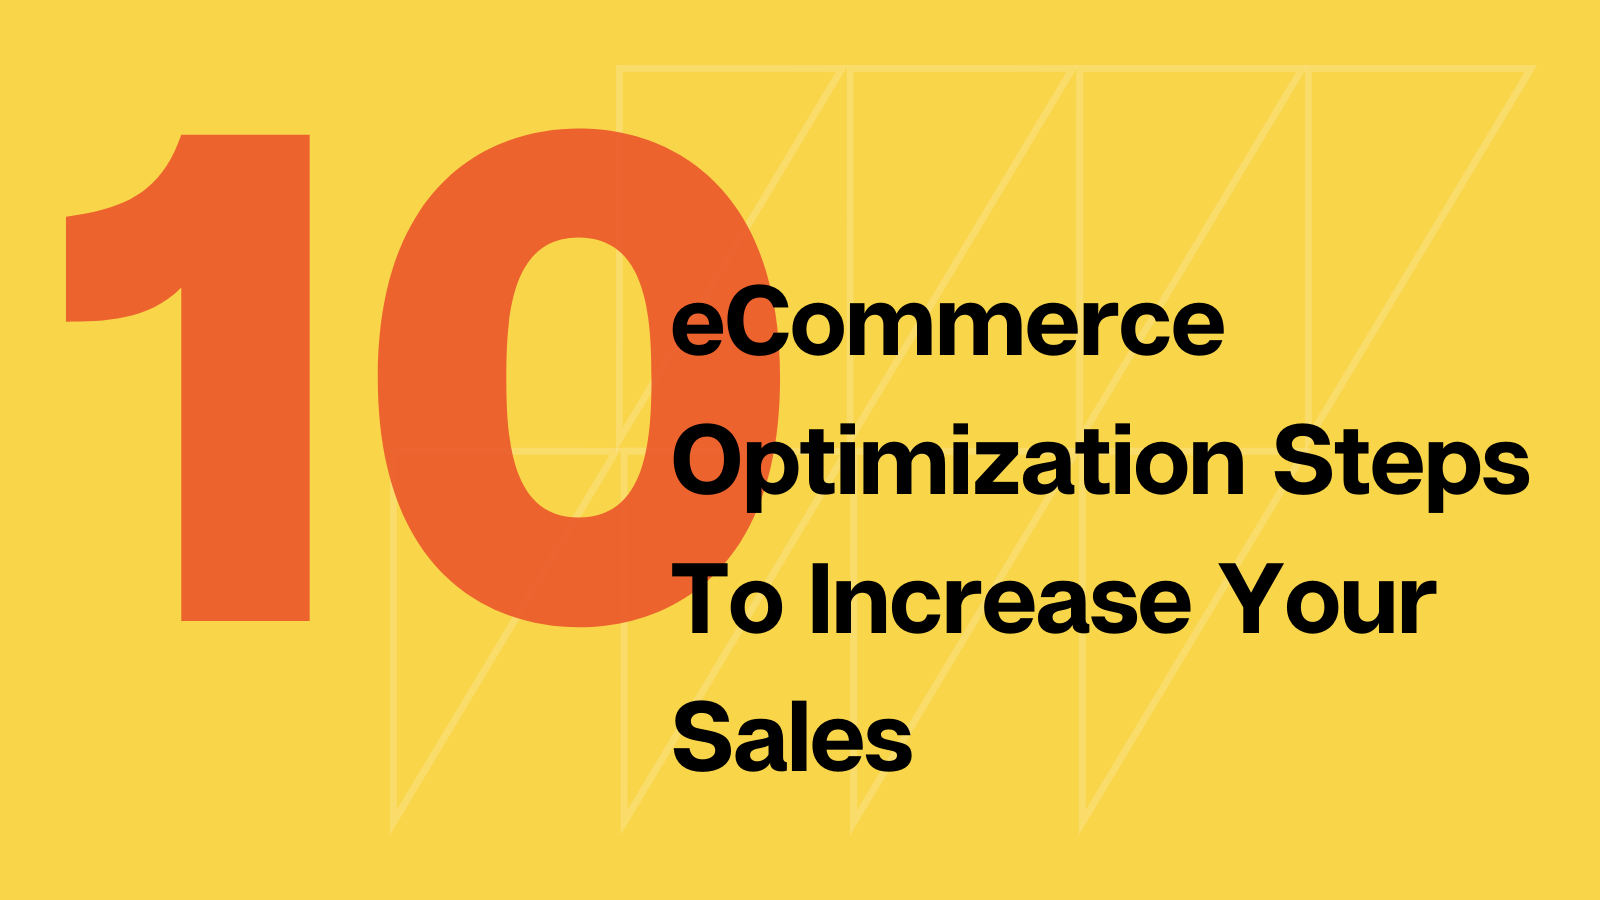 10 eCommerce Optimization Steps To Increase Your Sales 